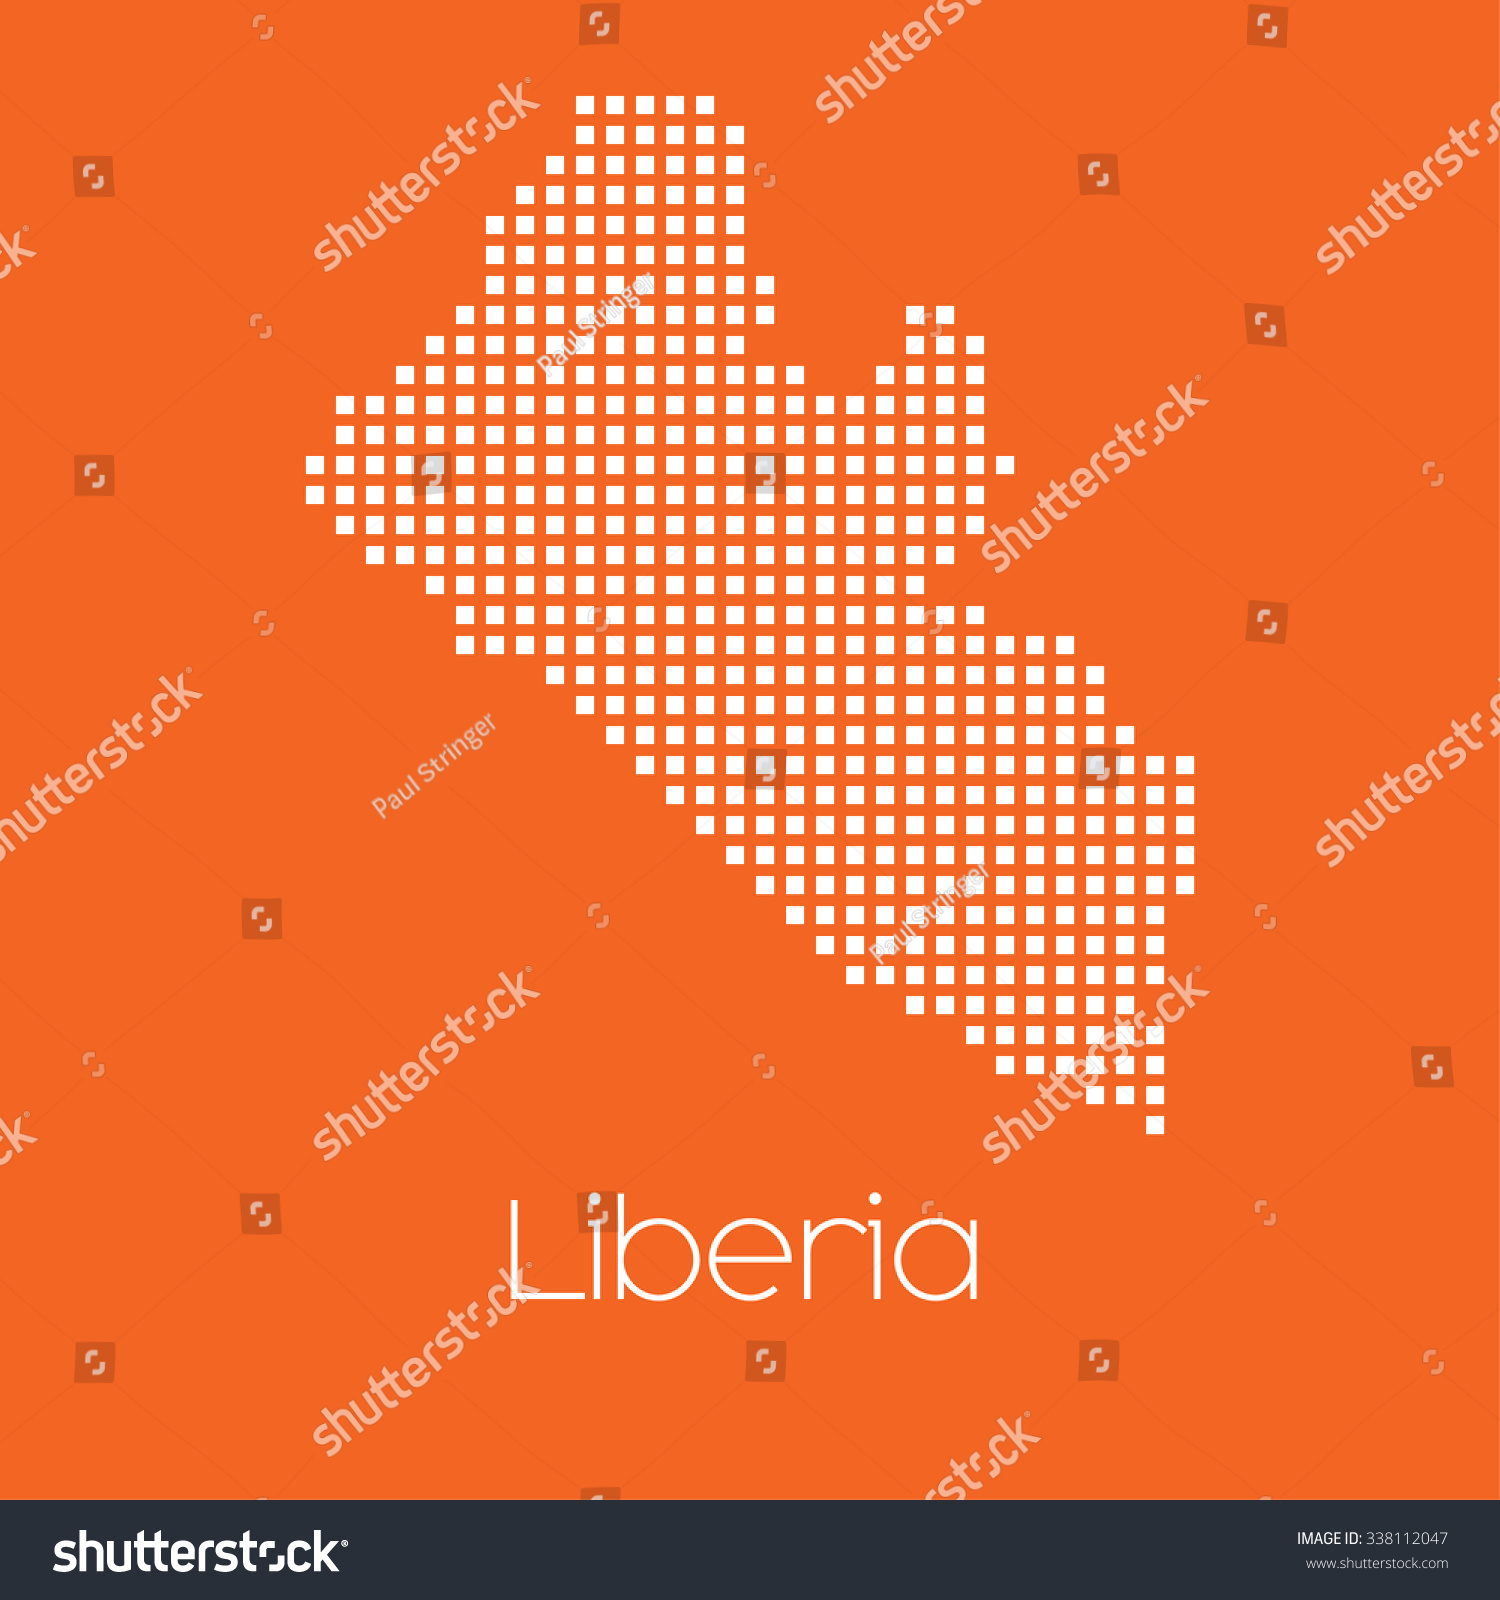 A Map of the country of Liberia #338112047